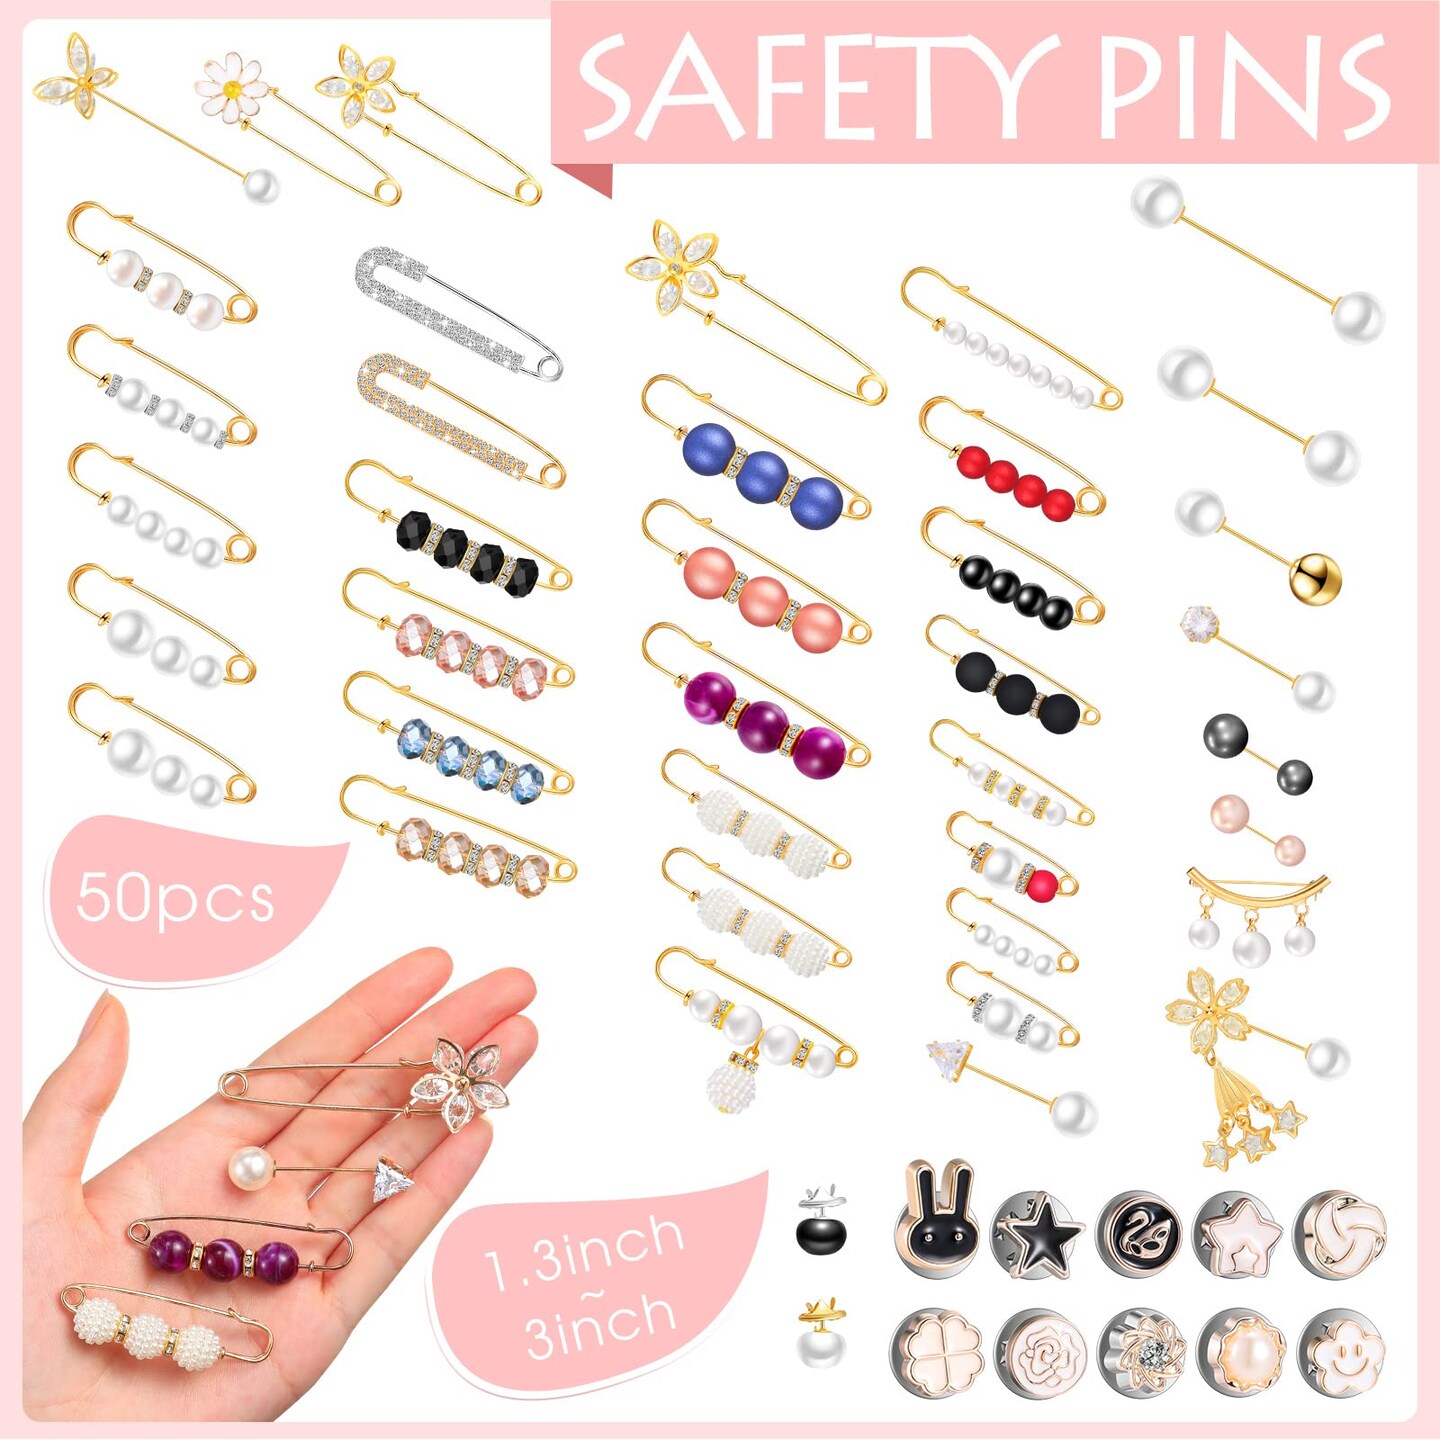 50 Pieces Pearl Brooch Pins Sweater Shawl Clips Decorative Safety Pin Hijab Pins Faux Pearl Rhinestones Collar Safety Pin for Women Girls Clothing Dresses Decoration Accessories with Storage Tank